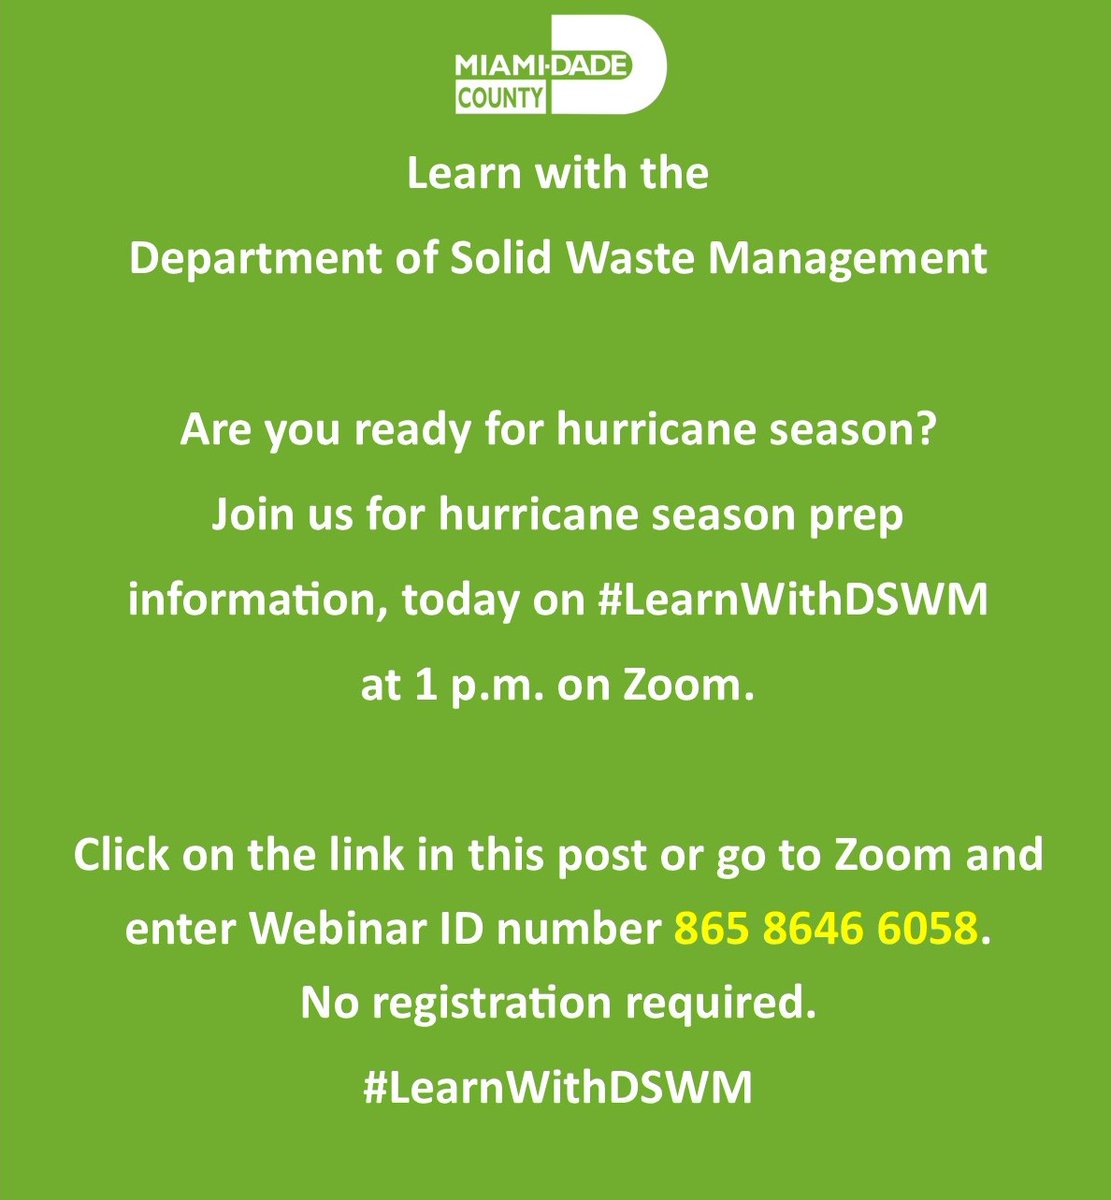 Join us for hurricane season prep information on #LearnWithDSWM today at 1 p.m. on Zoom. Visit miamidade.zoom.us/j/86586466058 to join or go to Zoom and enter Webinar ID number 865 8646 6058. No need to register. Can't watch live? - Watch on demand at bddy.me/3XtZIUk.